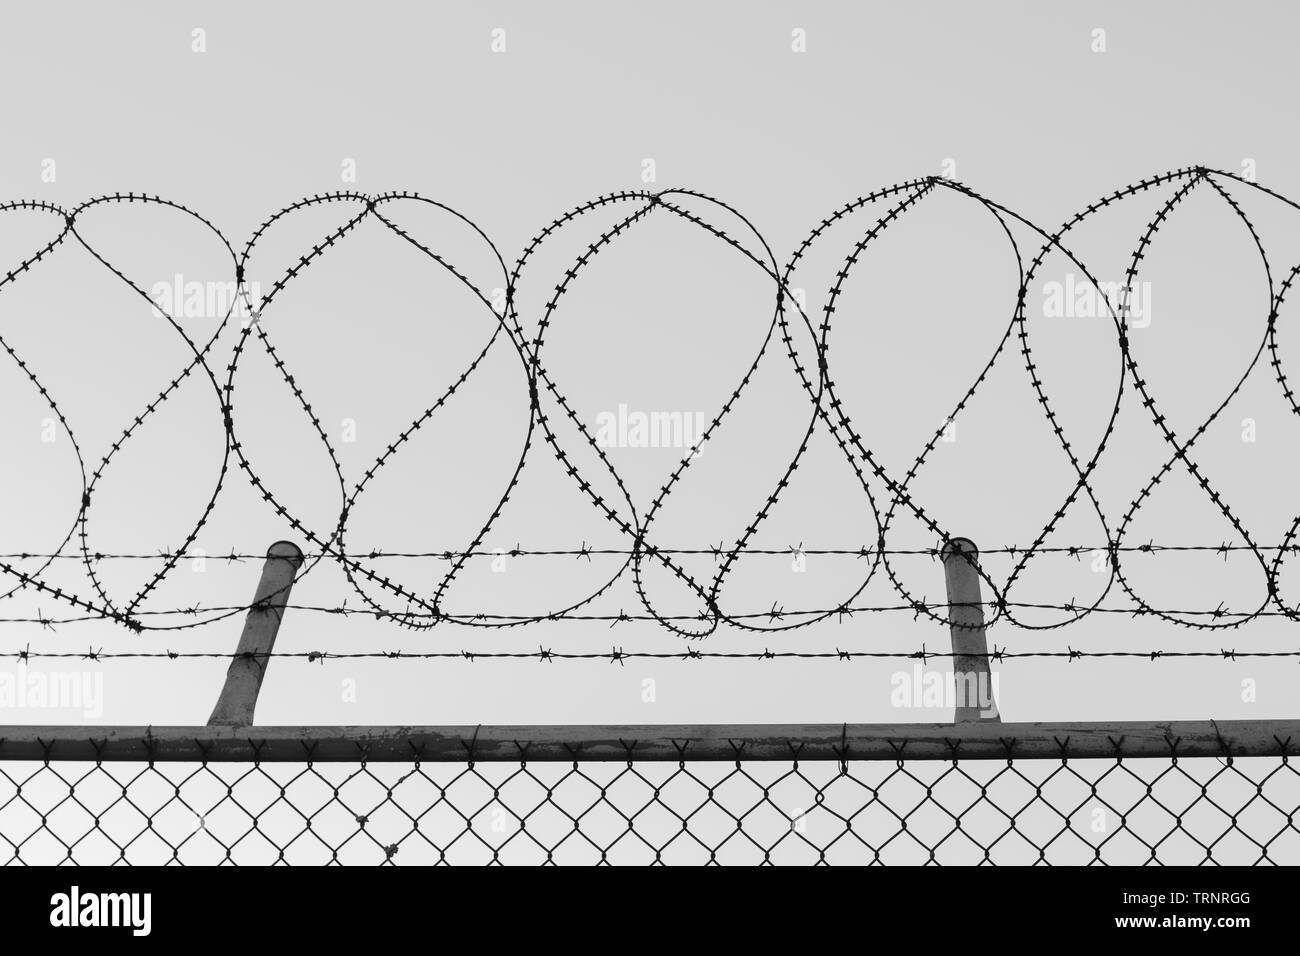 Tangled razor wire on top of a wire mesh perimeter fence, black and white Stock Photo